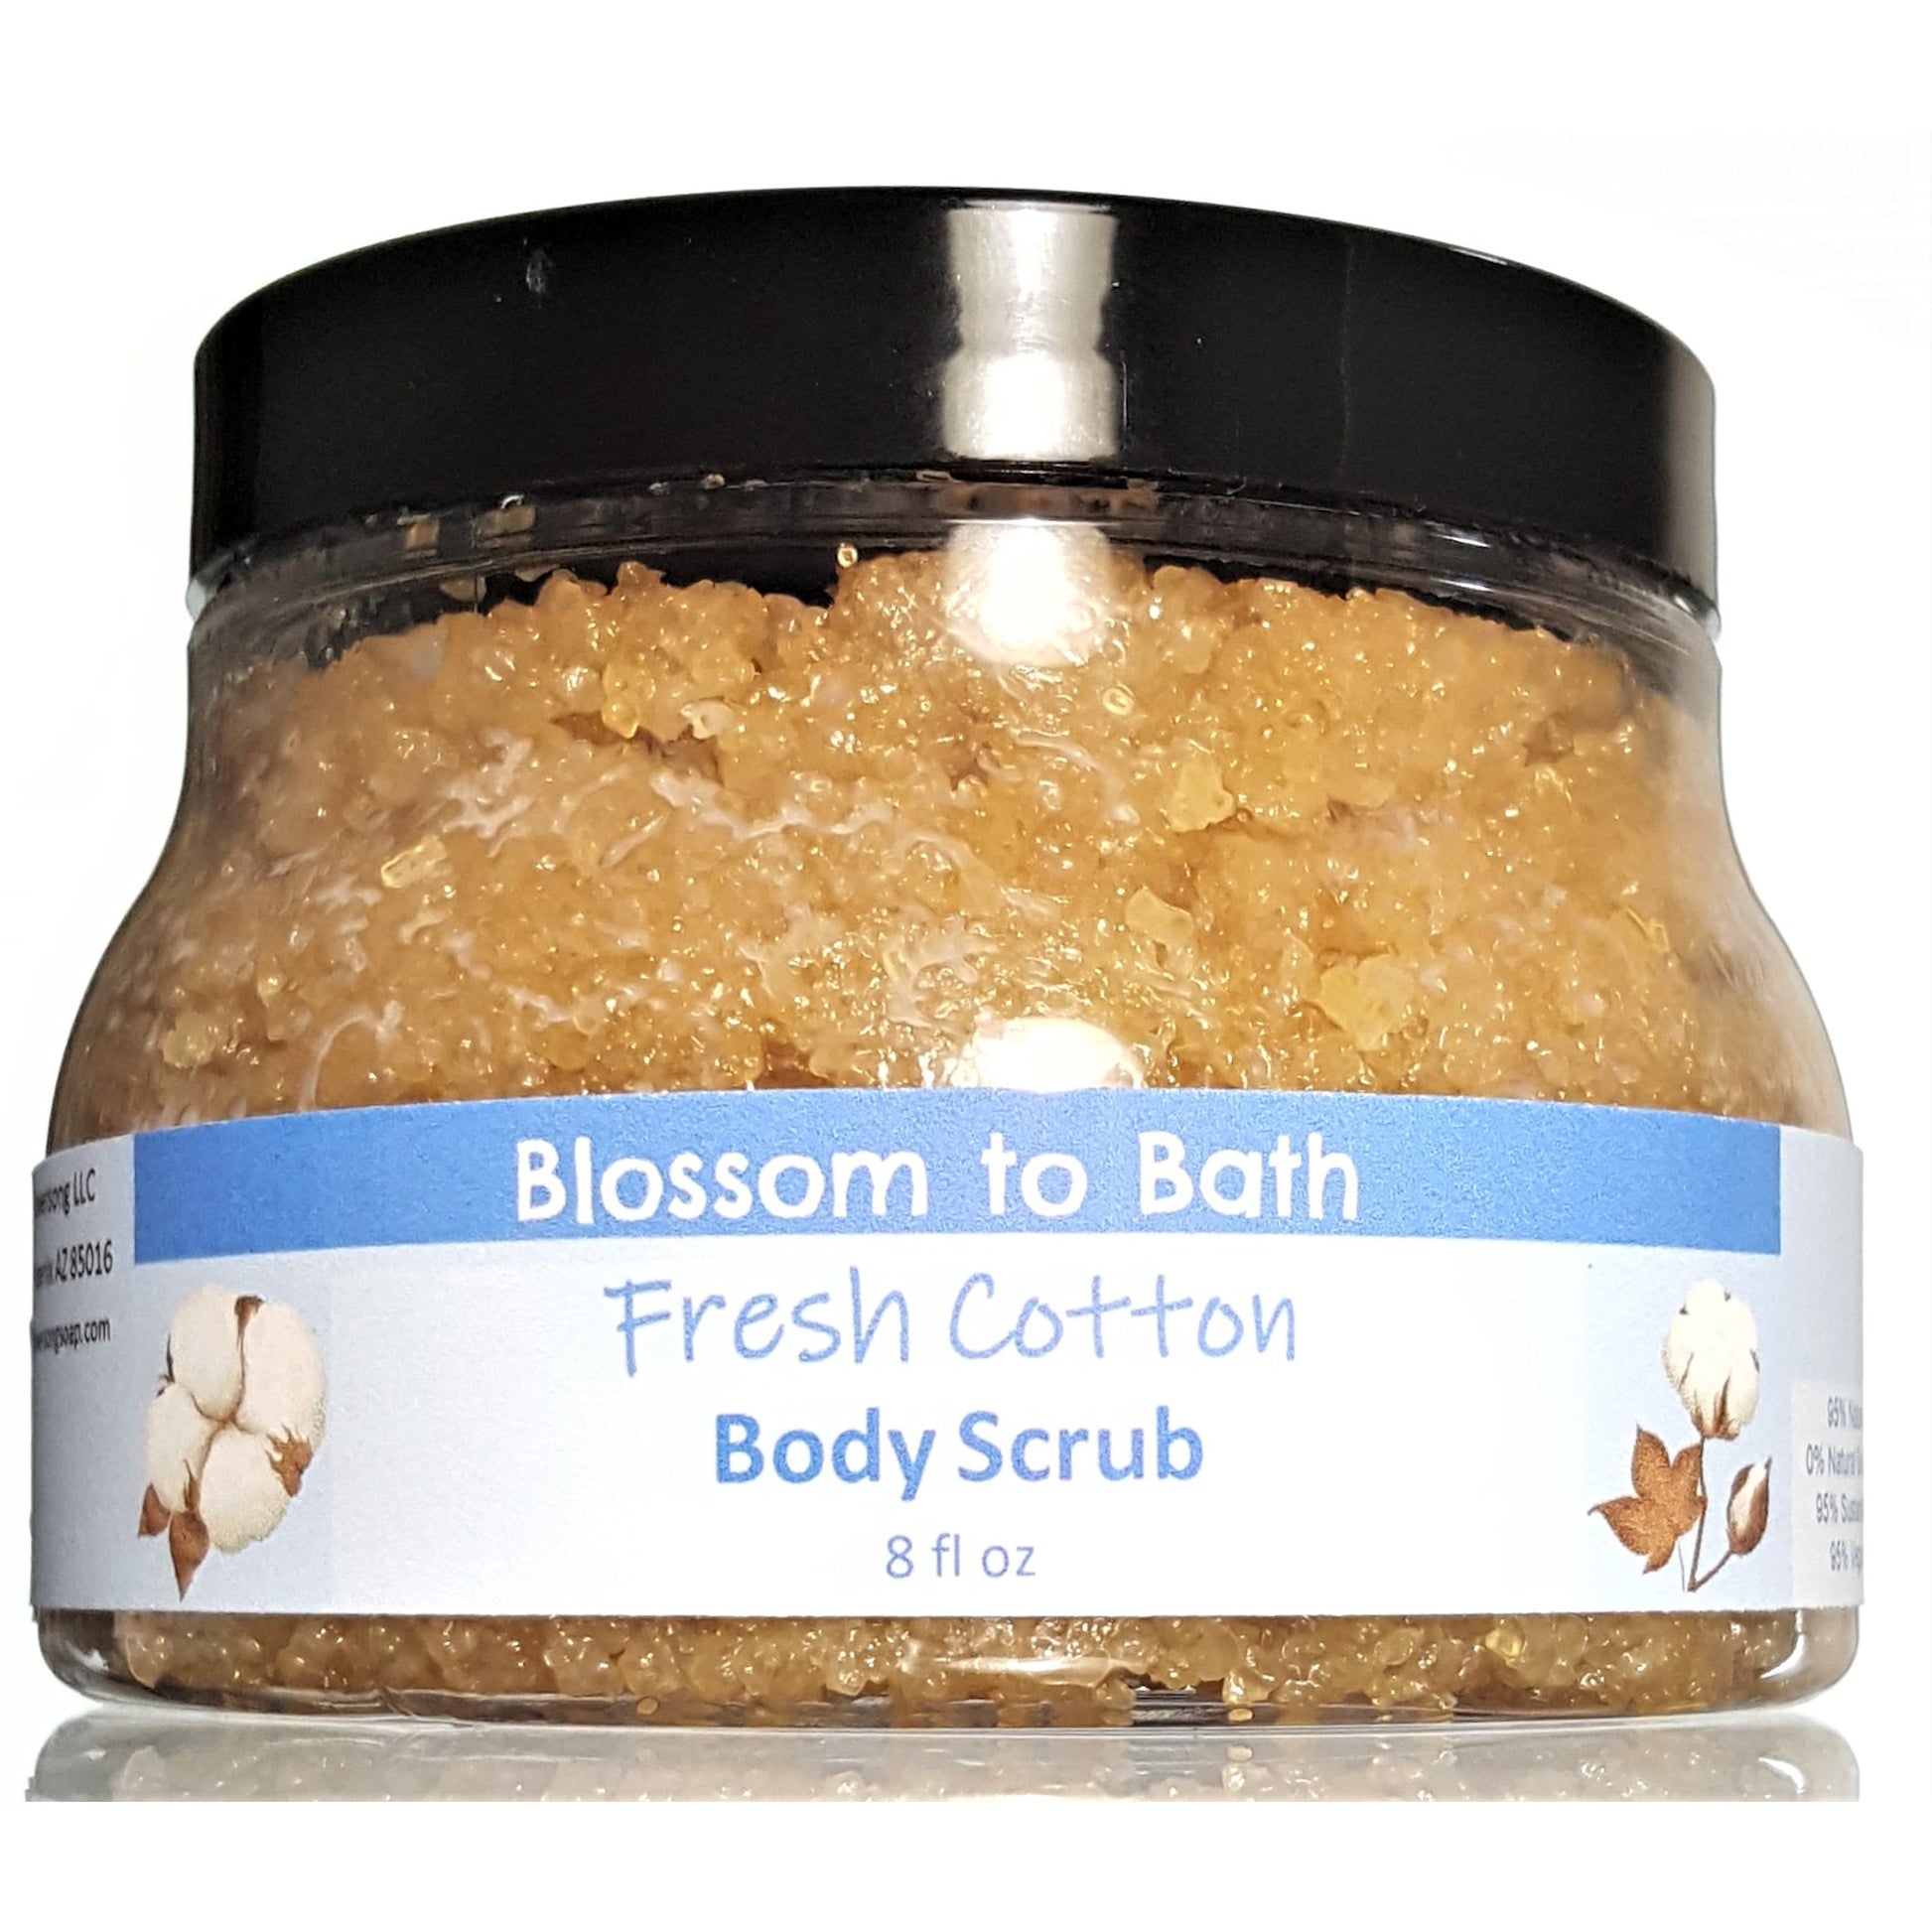 Buy Blossom to Bath Fresh Cotton Body Scrub from Flowersong Soap Studio.  Large crystal turbinado sugar plus  rich oils conveniently exfoliate and moisturize in one step  Smells like clean sheets drying in a breeze of spring blossoms.